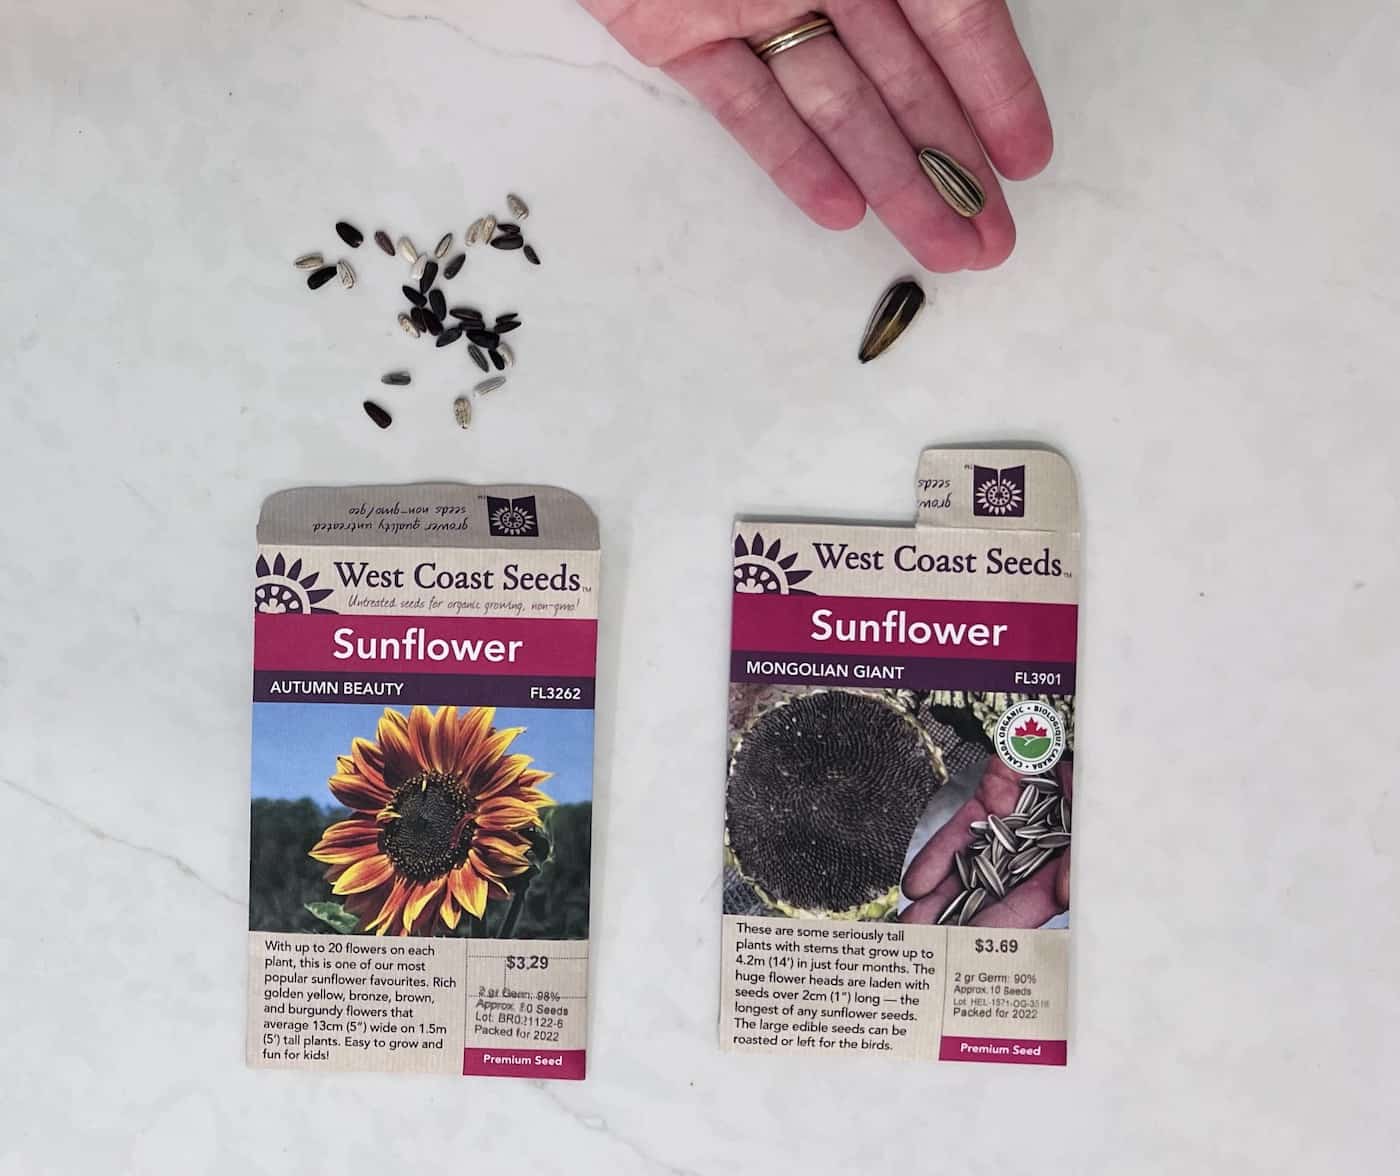 Regular sunflower seeds compared to giant ones